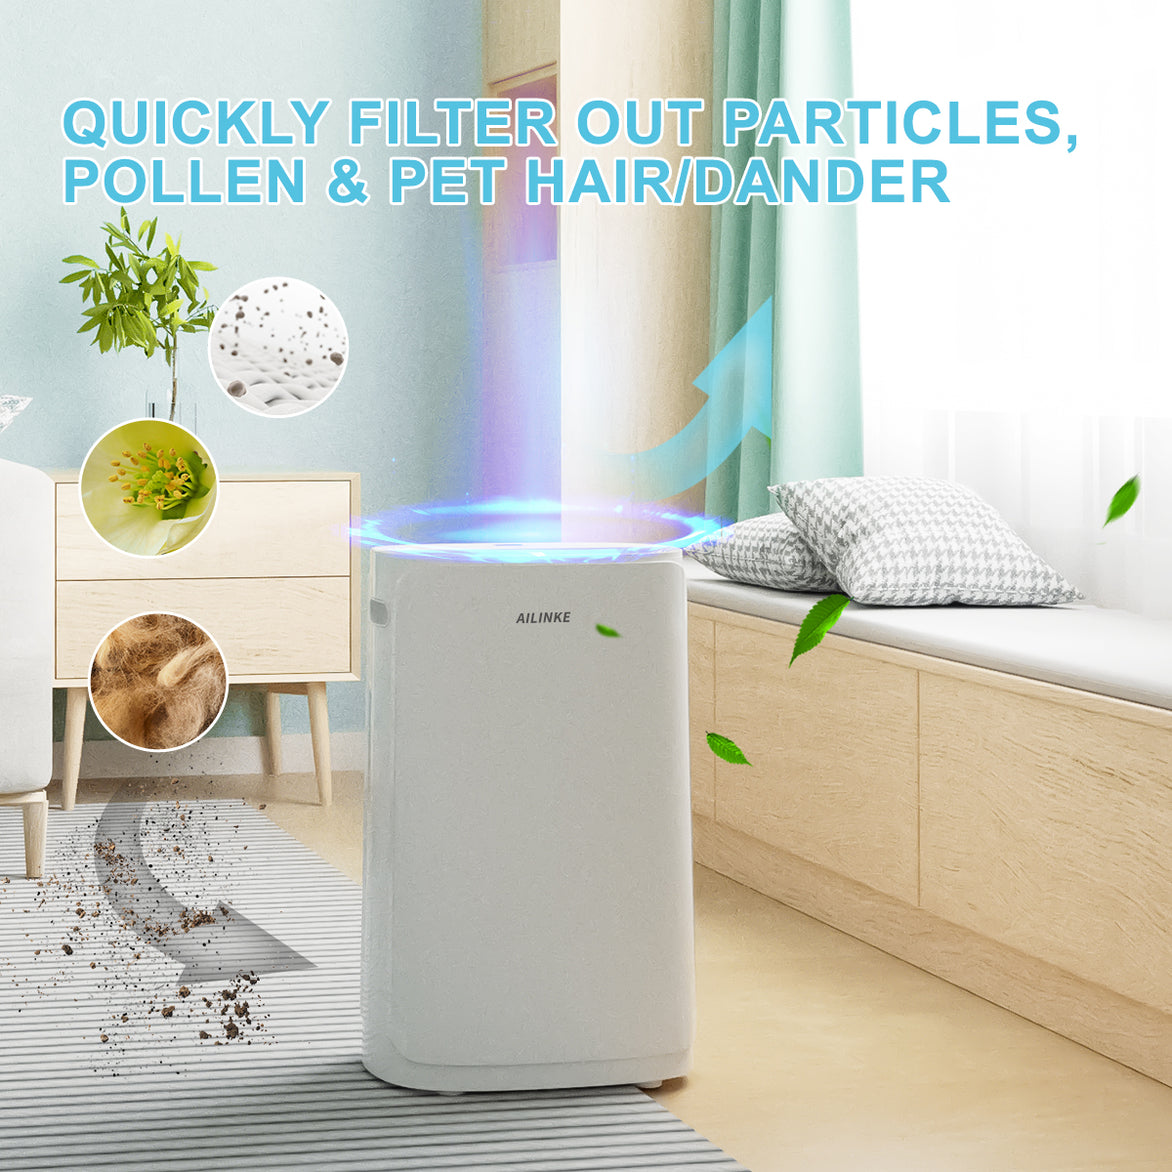 Air Purifiers for Home Large Room, 878 Sq Ft True HEPA Technology Filter Removal 99%+ for Pets Dander Smoke Odor Dust Pollen,Bedroom, Room, Office, Classroom